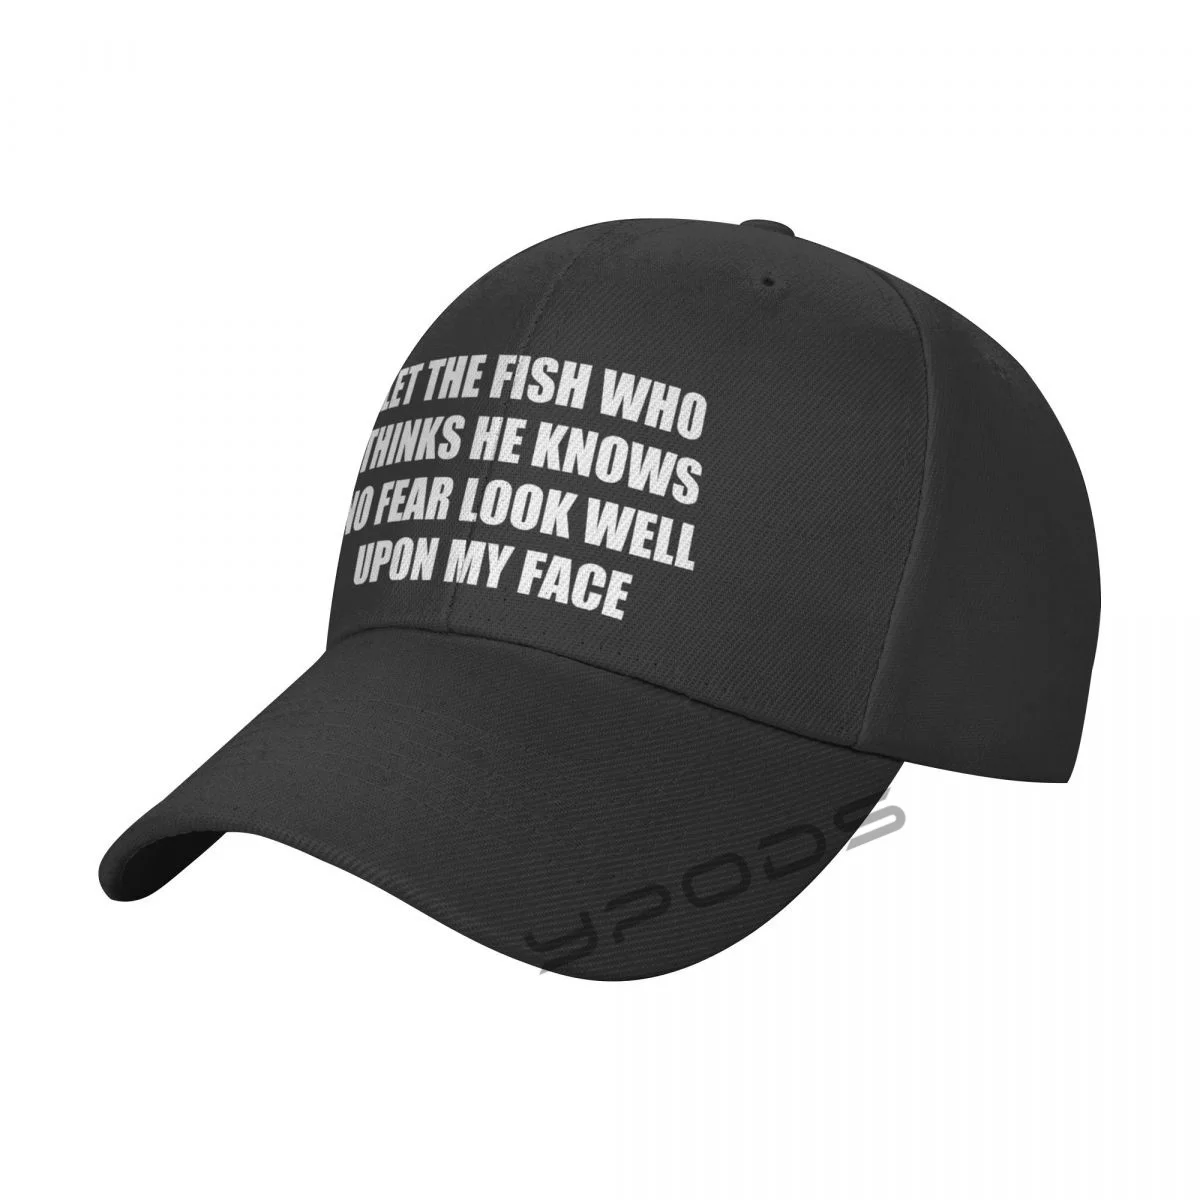 

Baseball Cap Let The Fish Who Thinks He Knows No Fear Look Well Upon My Face Adorable Caps Hat Unisex-Teens Snapback Flat Bill